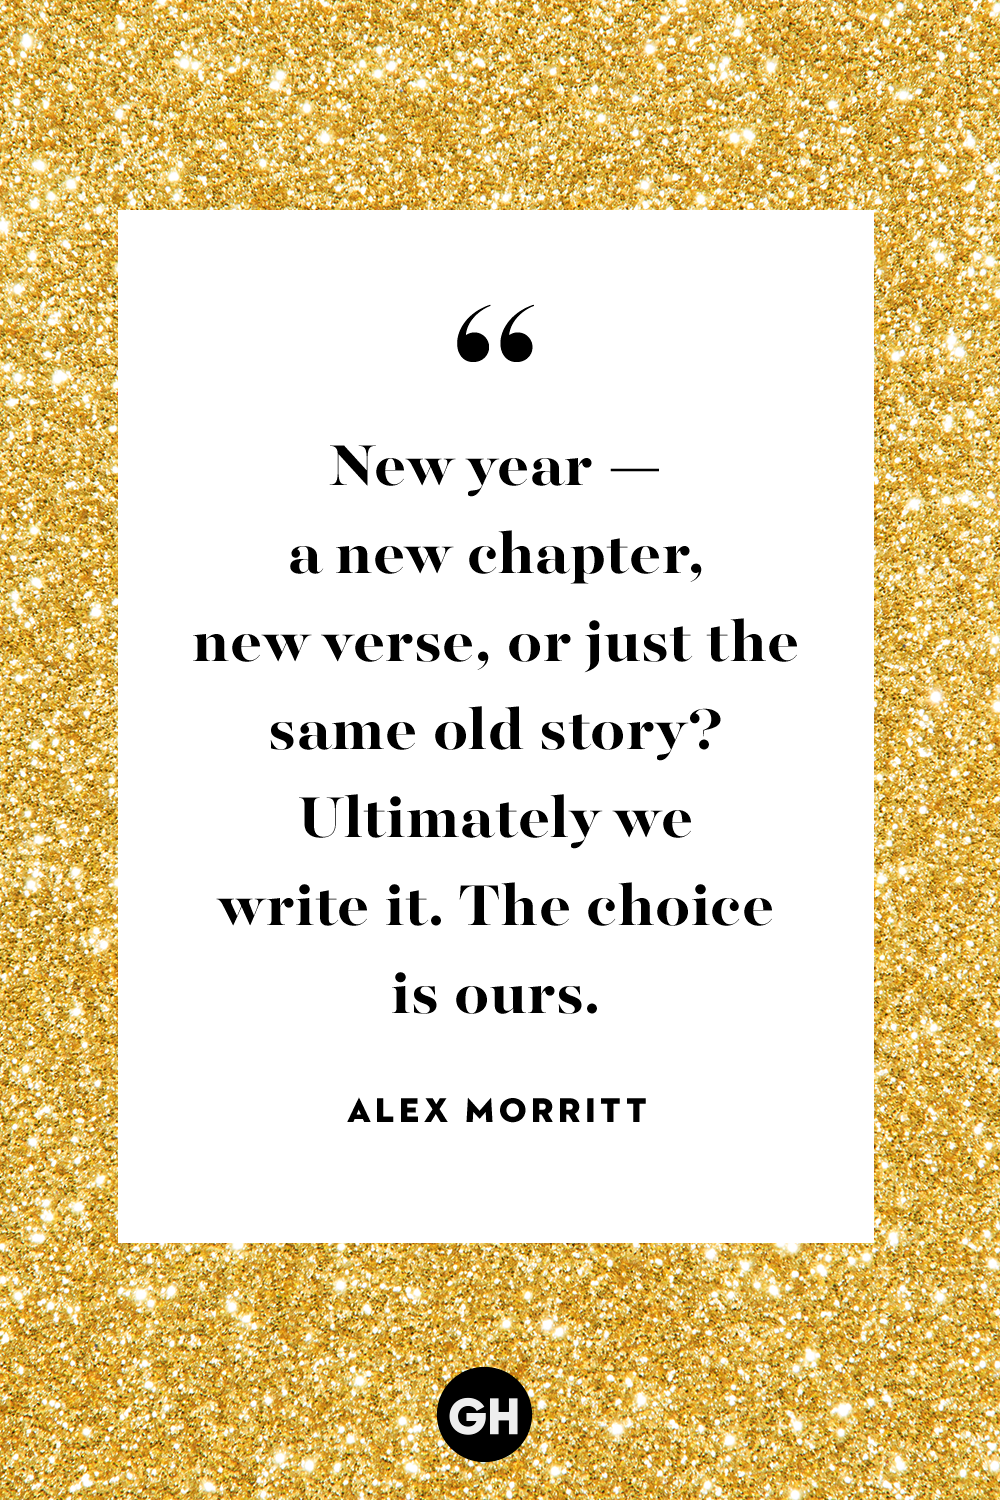 gh-new-years-quotes-alex-morritt-1573744513.png